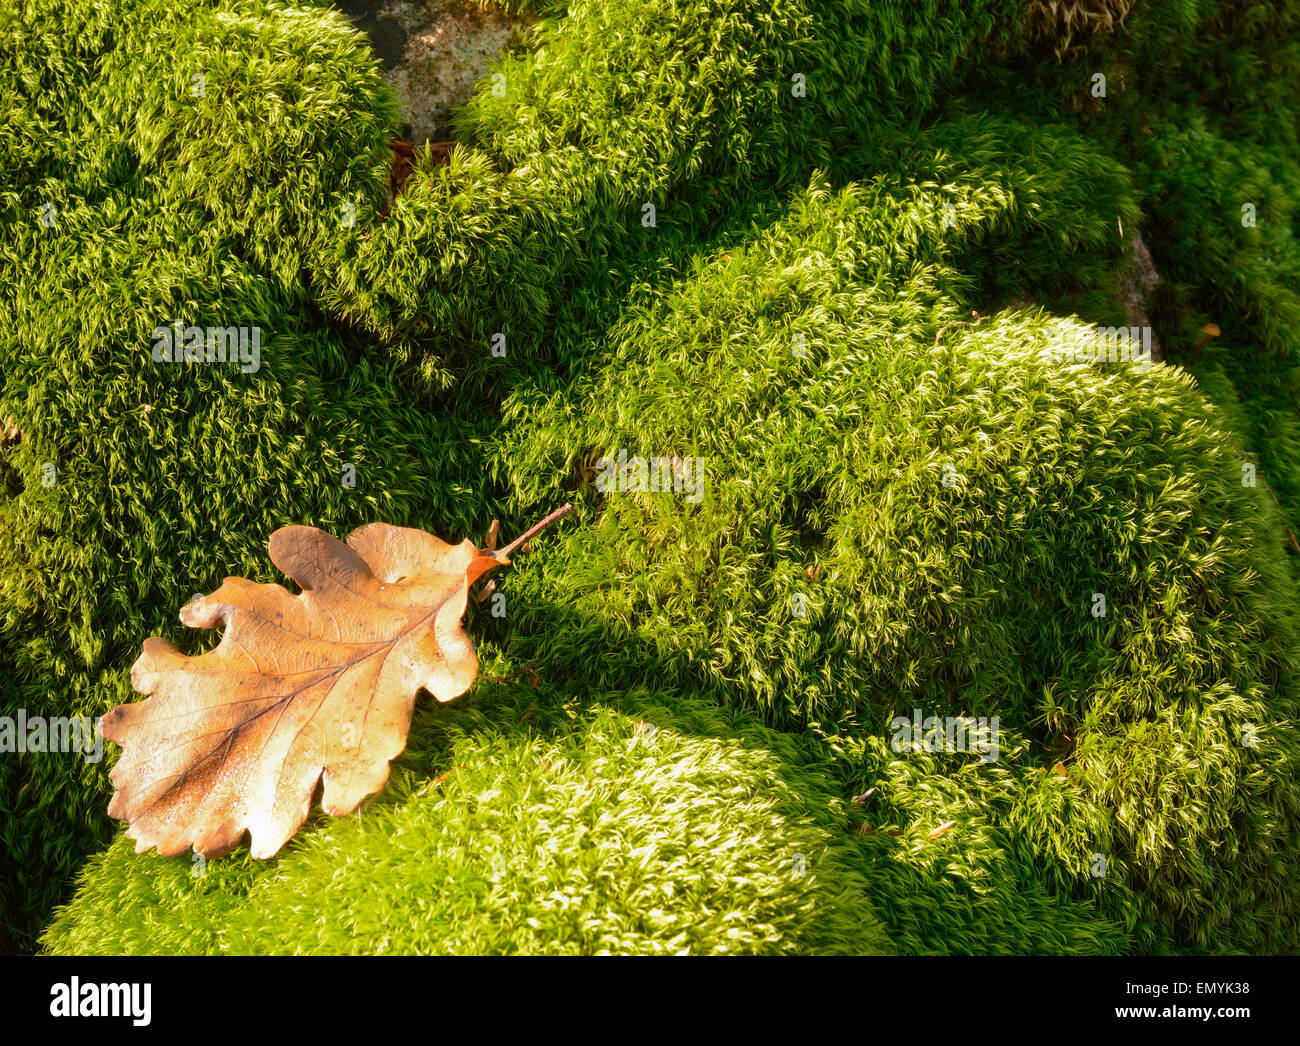 dry leaf on green moss in the undergrowth Stock Photo